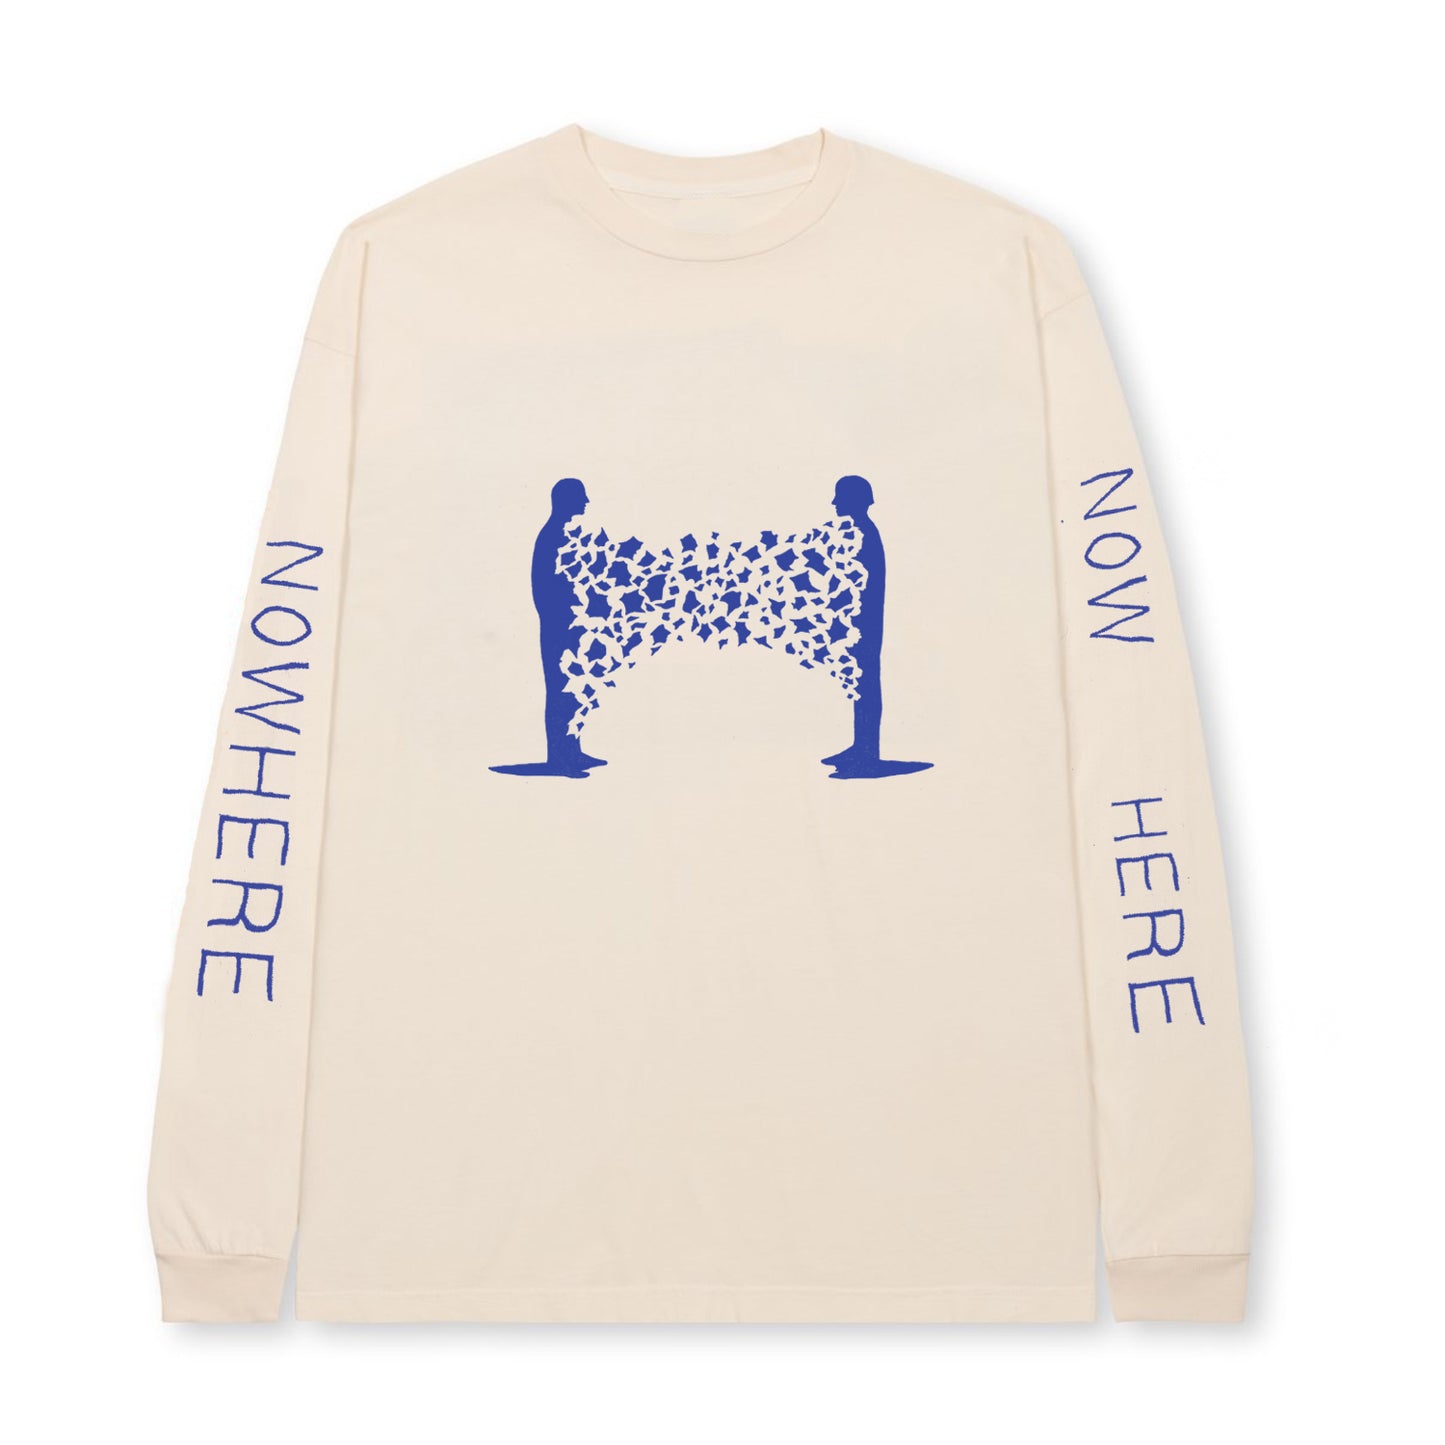 Gracie and Rachel - Nowhere Now Here long sleeve bundle - Cassette